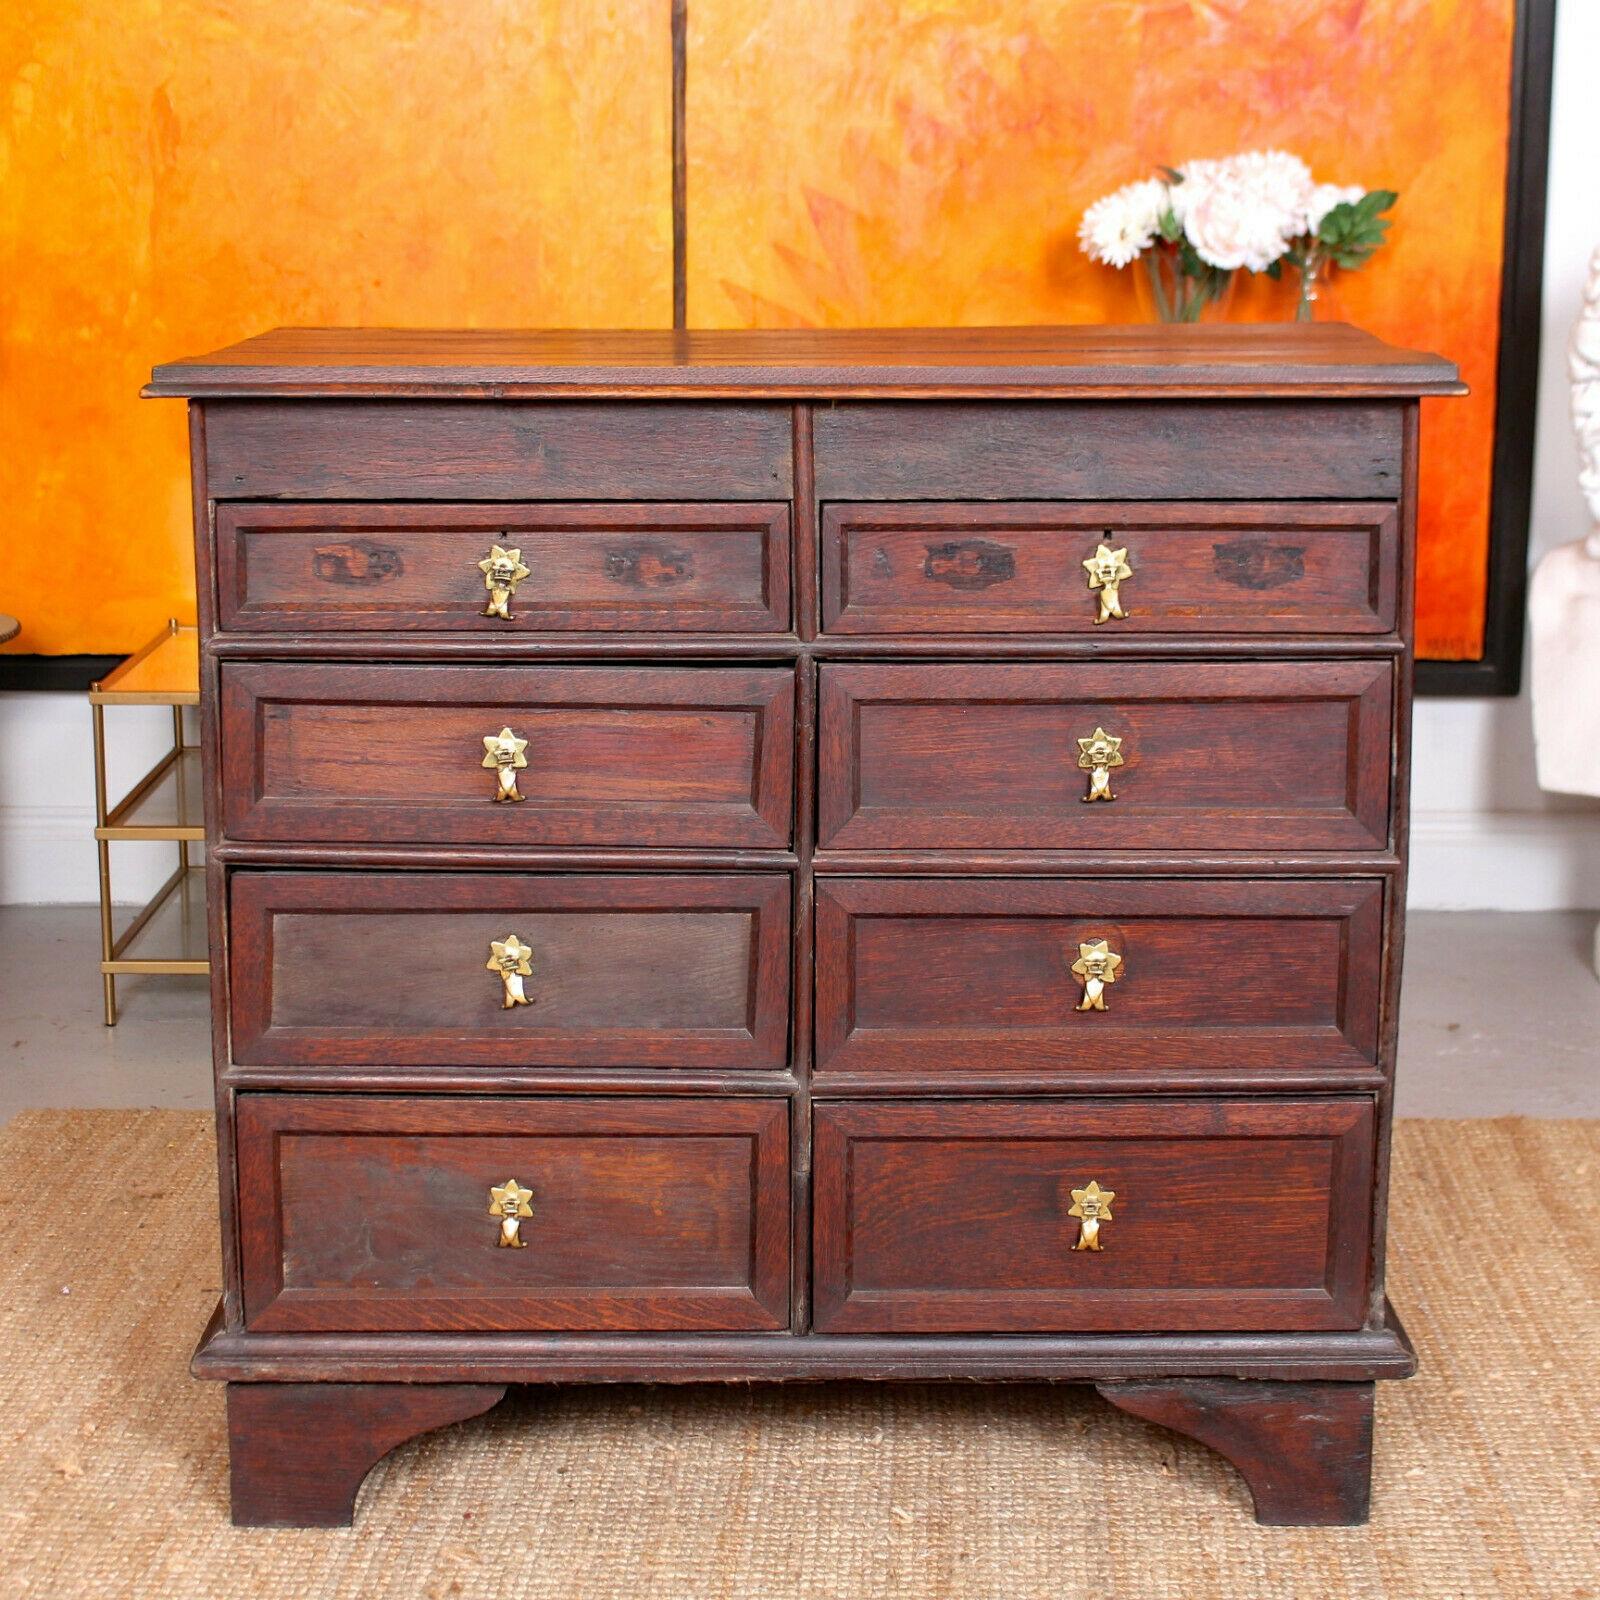 An impressive 18th century oak chest of drawers.
Constructed from solid oak boasting an impressive well figured wild grain and aged rich patina. Heavy for the size owing to the thick cut of oak.
Fitted eight drawers with dovetailed jointing, oak